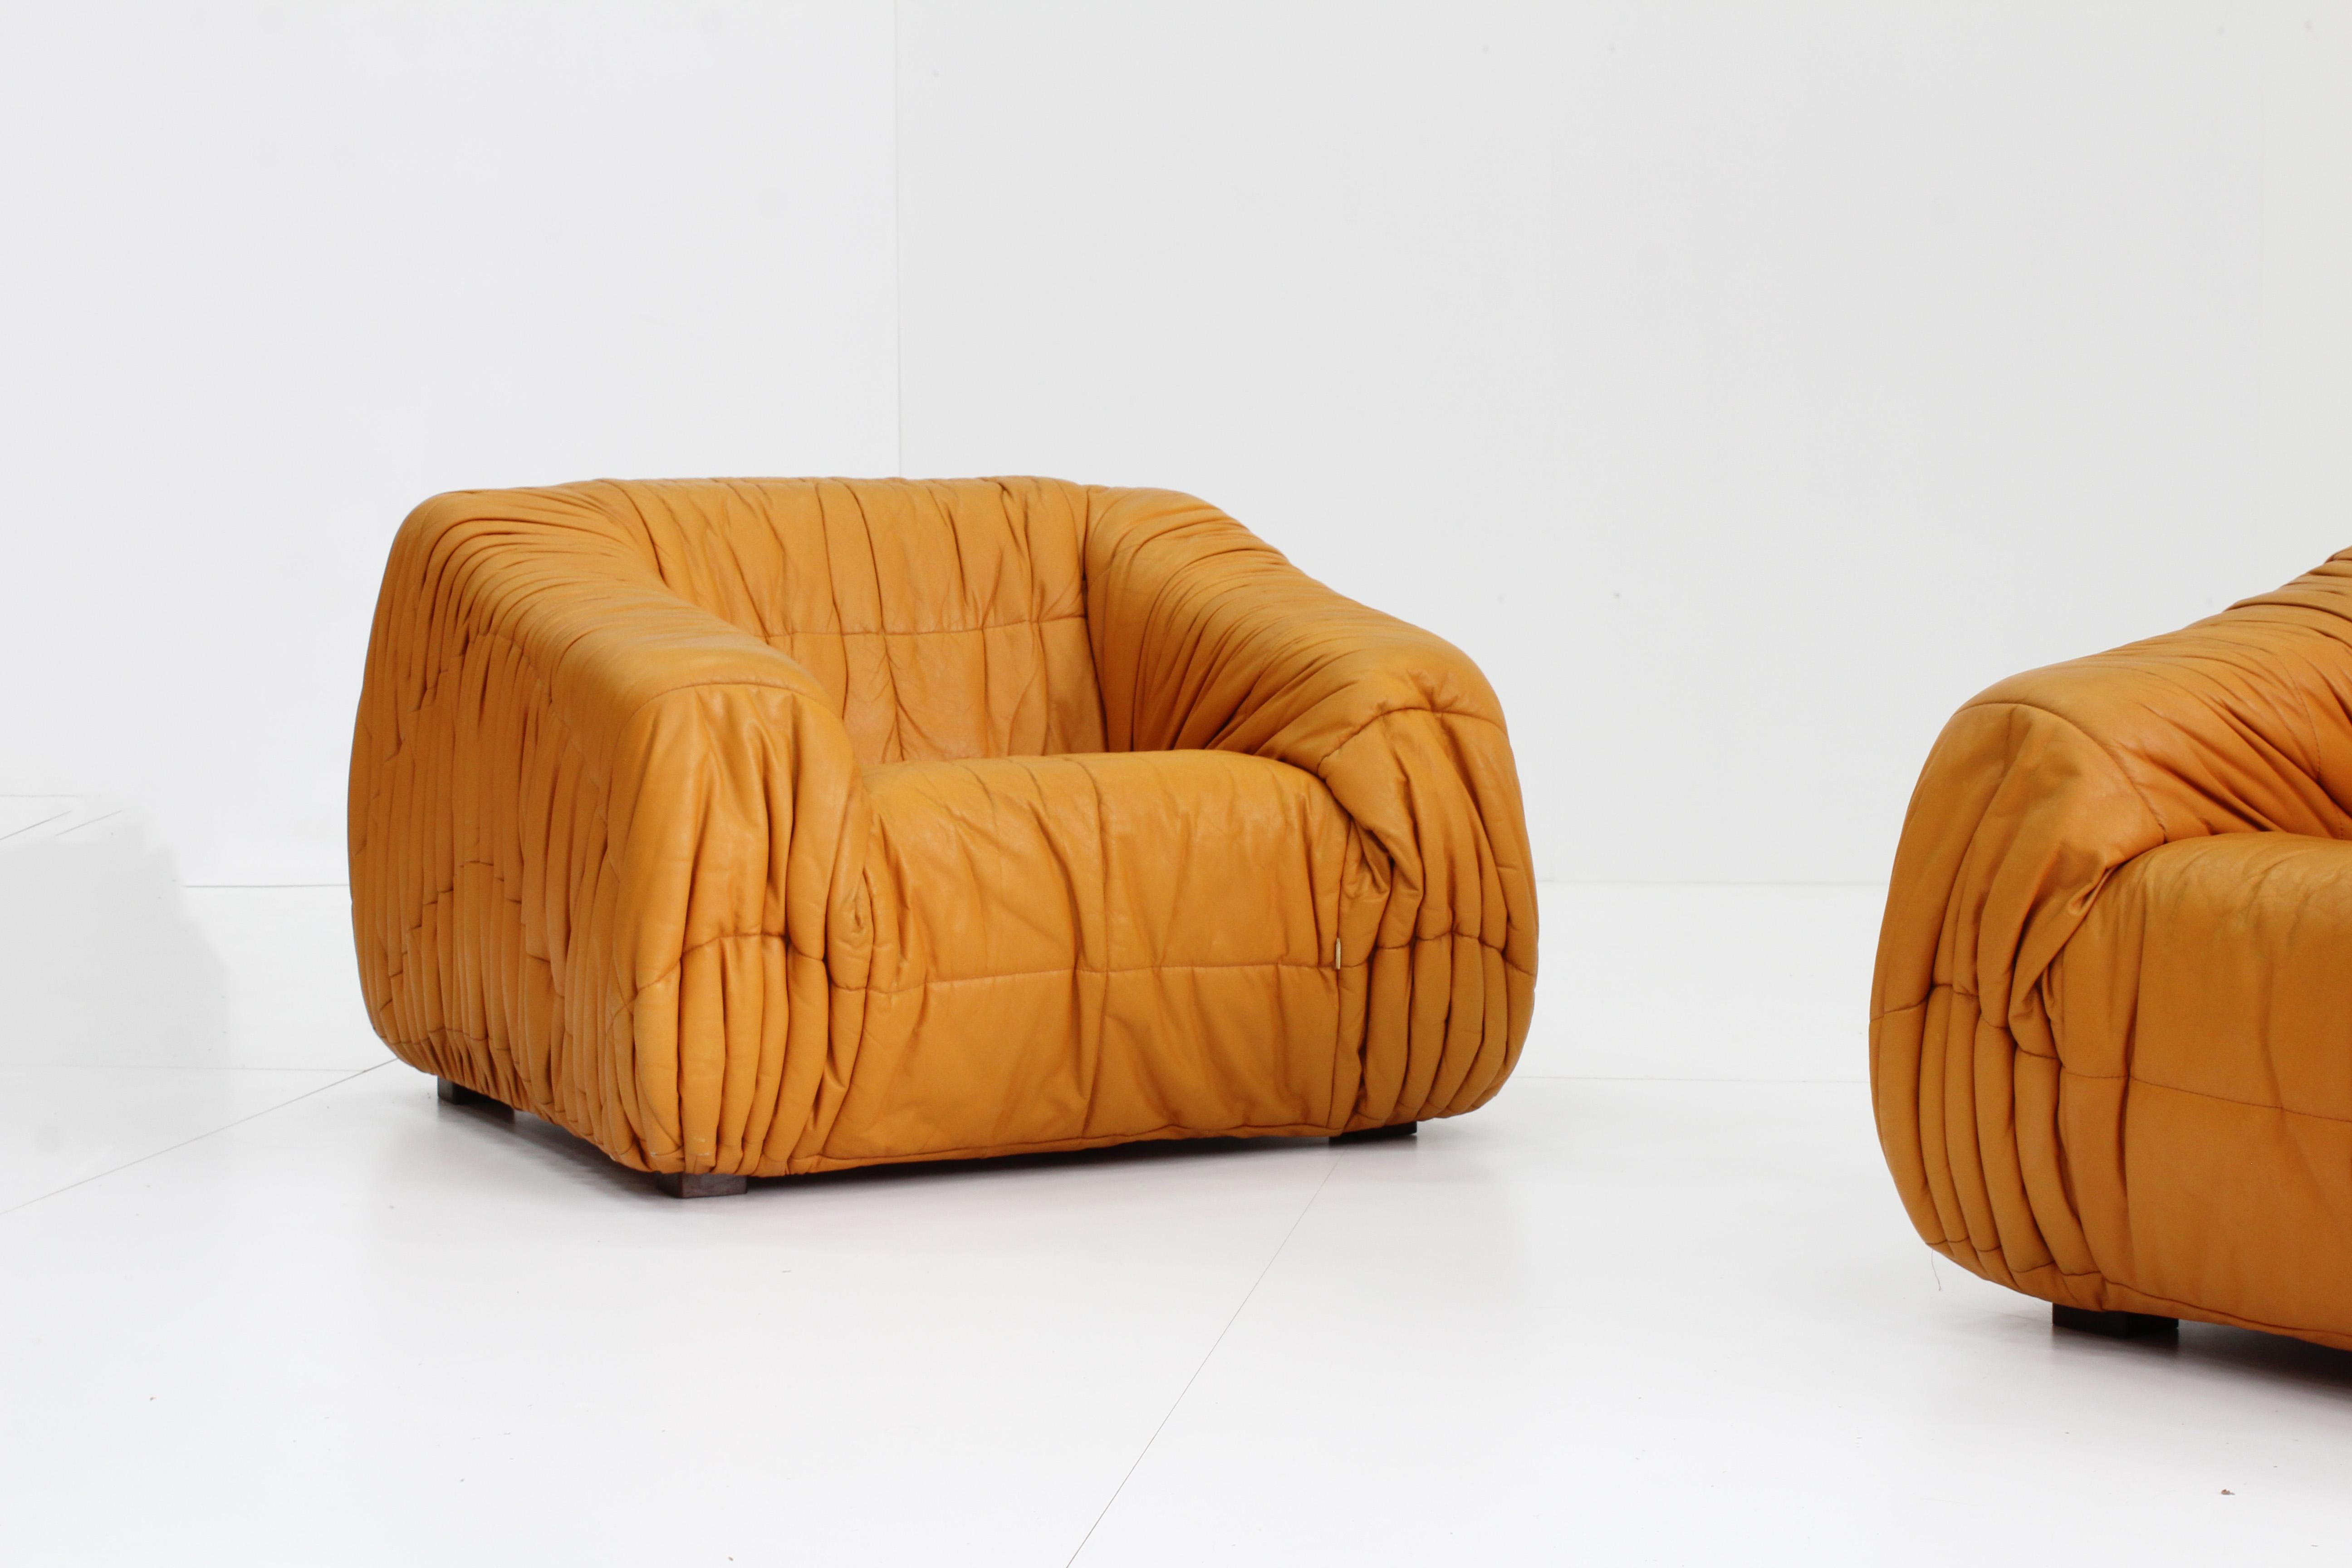 Piumino sofa & 2 lounge chairs by Jonathan de Pas, Donato d'Urbino  & Paolo Lomazzi for Dall’occa , 1970s Italy.  This vintage design piece is in cognac colour, completely made of foam and very comfortable. In good condition , with some minor traces